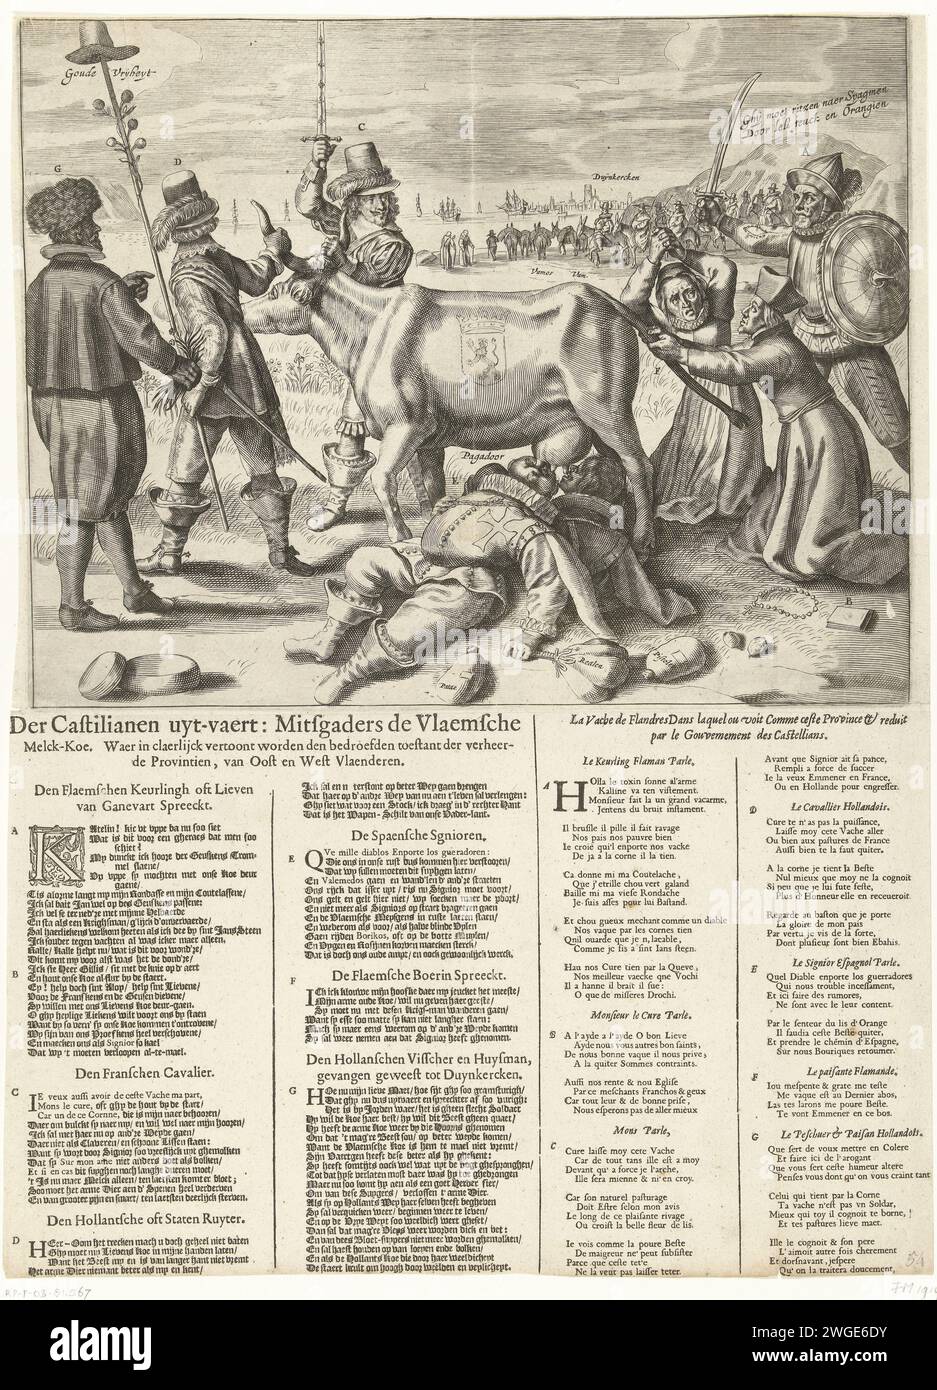 Cartoon on the Spanish loss of Dunkirk, 1646, 1646 print Cartoon on the conquest of Dunkirk by the French army on the Spaniards in 1646 and the deplorable state of the province of Flanders exploited by Spain. The dairy cow Flanders is taken by the Hoorns and led away by a Frenchman (French Cavalier) and a Dutchman (Staatse Ruiter). Under the cow are two Spaniards (Spanish signors) who drink full of the cow's udders. A Spanish Jesuit and a Flemish soldier try to keep the cow. Left front a Dutch sailor. In the background, a heavily loaded procession leaves for Spain. Under the print, a text shee Stock Photo